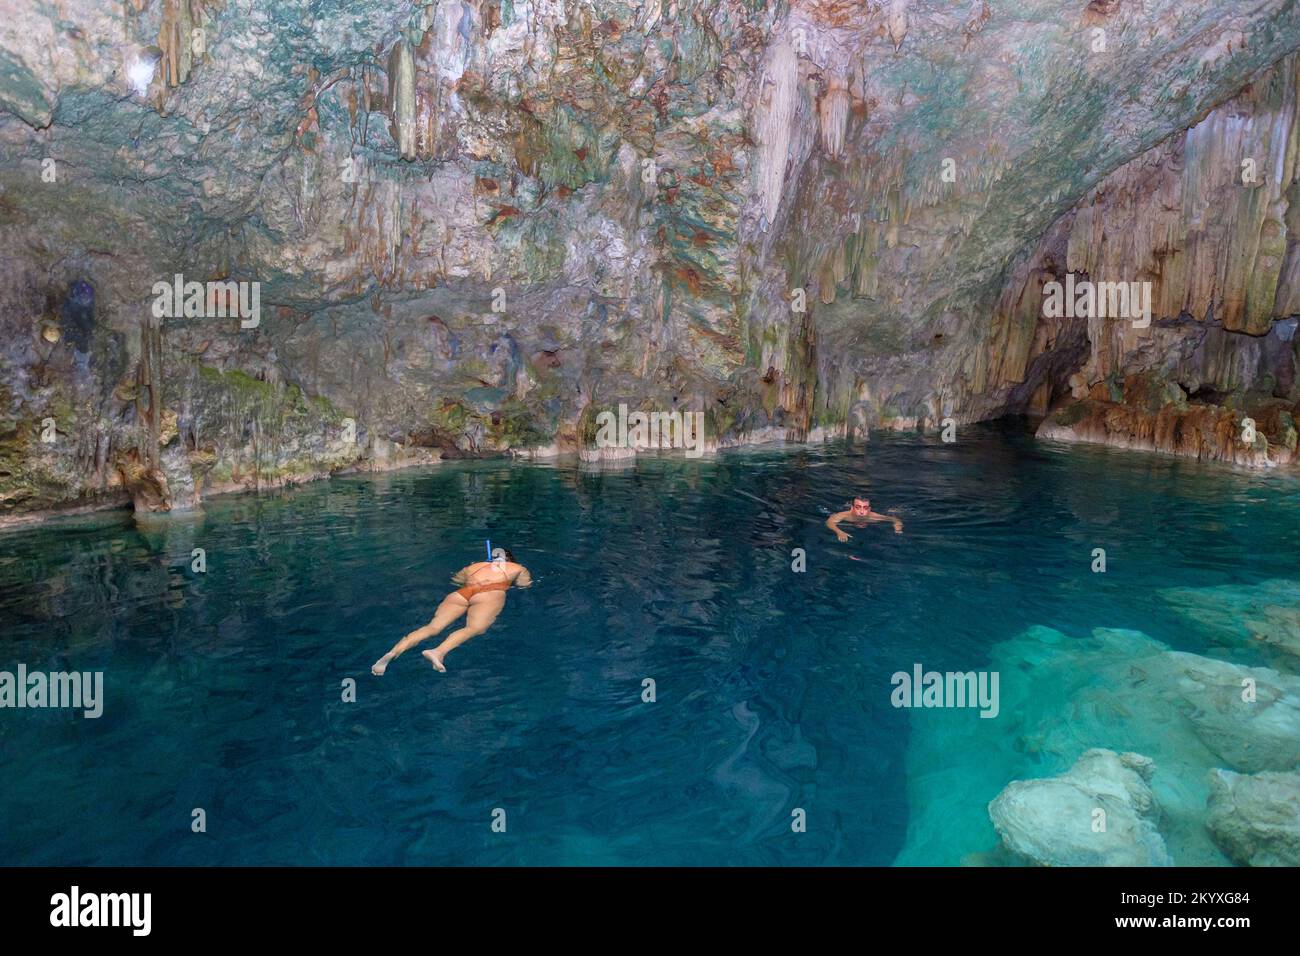 Saturno Cave is a spectacular natural wonder located about 20km from Varadero, Cuba. It has a crystal clear fresh water lake with a depth of 22 meters. Stock Photo